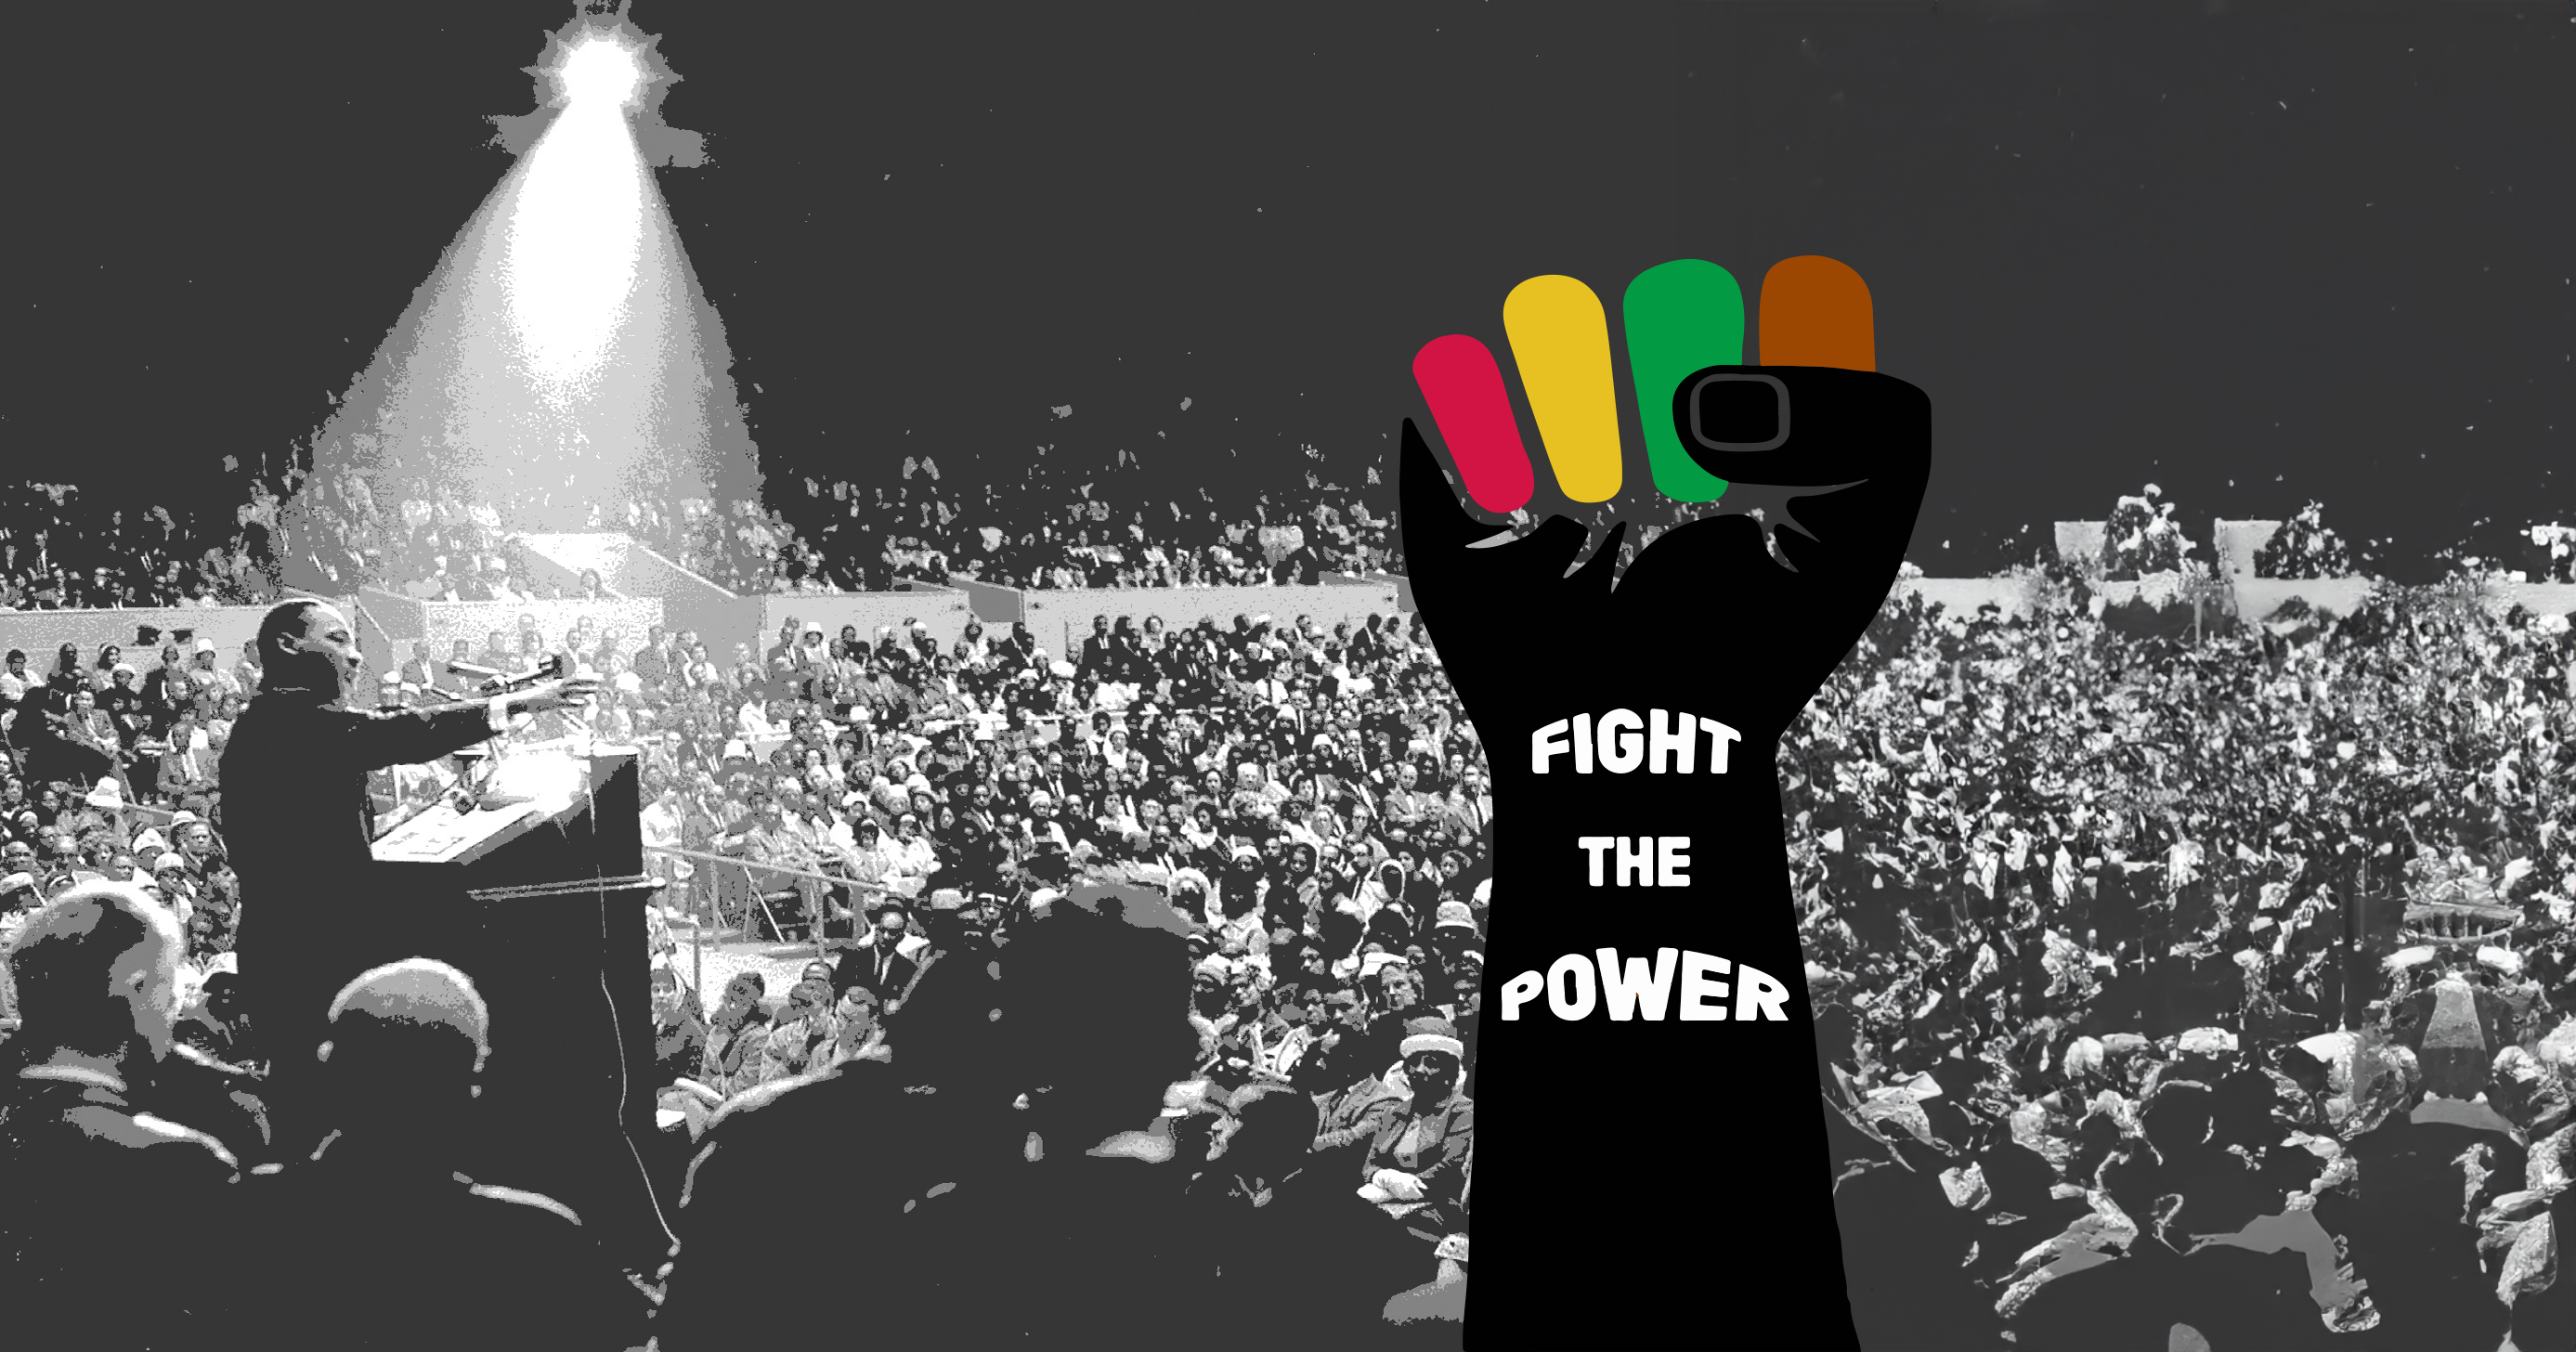 a black and white photo in the background, a large crowd is gathered, focusing their attention on a stage where Dr. Martin Luther King Jr., stands at a podium, illuminated by a dramatic beam of light from above, which highlights his presence as the speaker. Overlaying the photo is a raised clenched fist with the text 